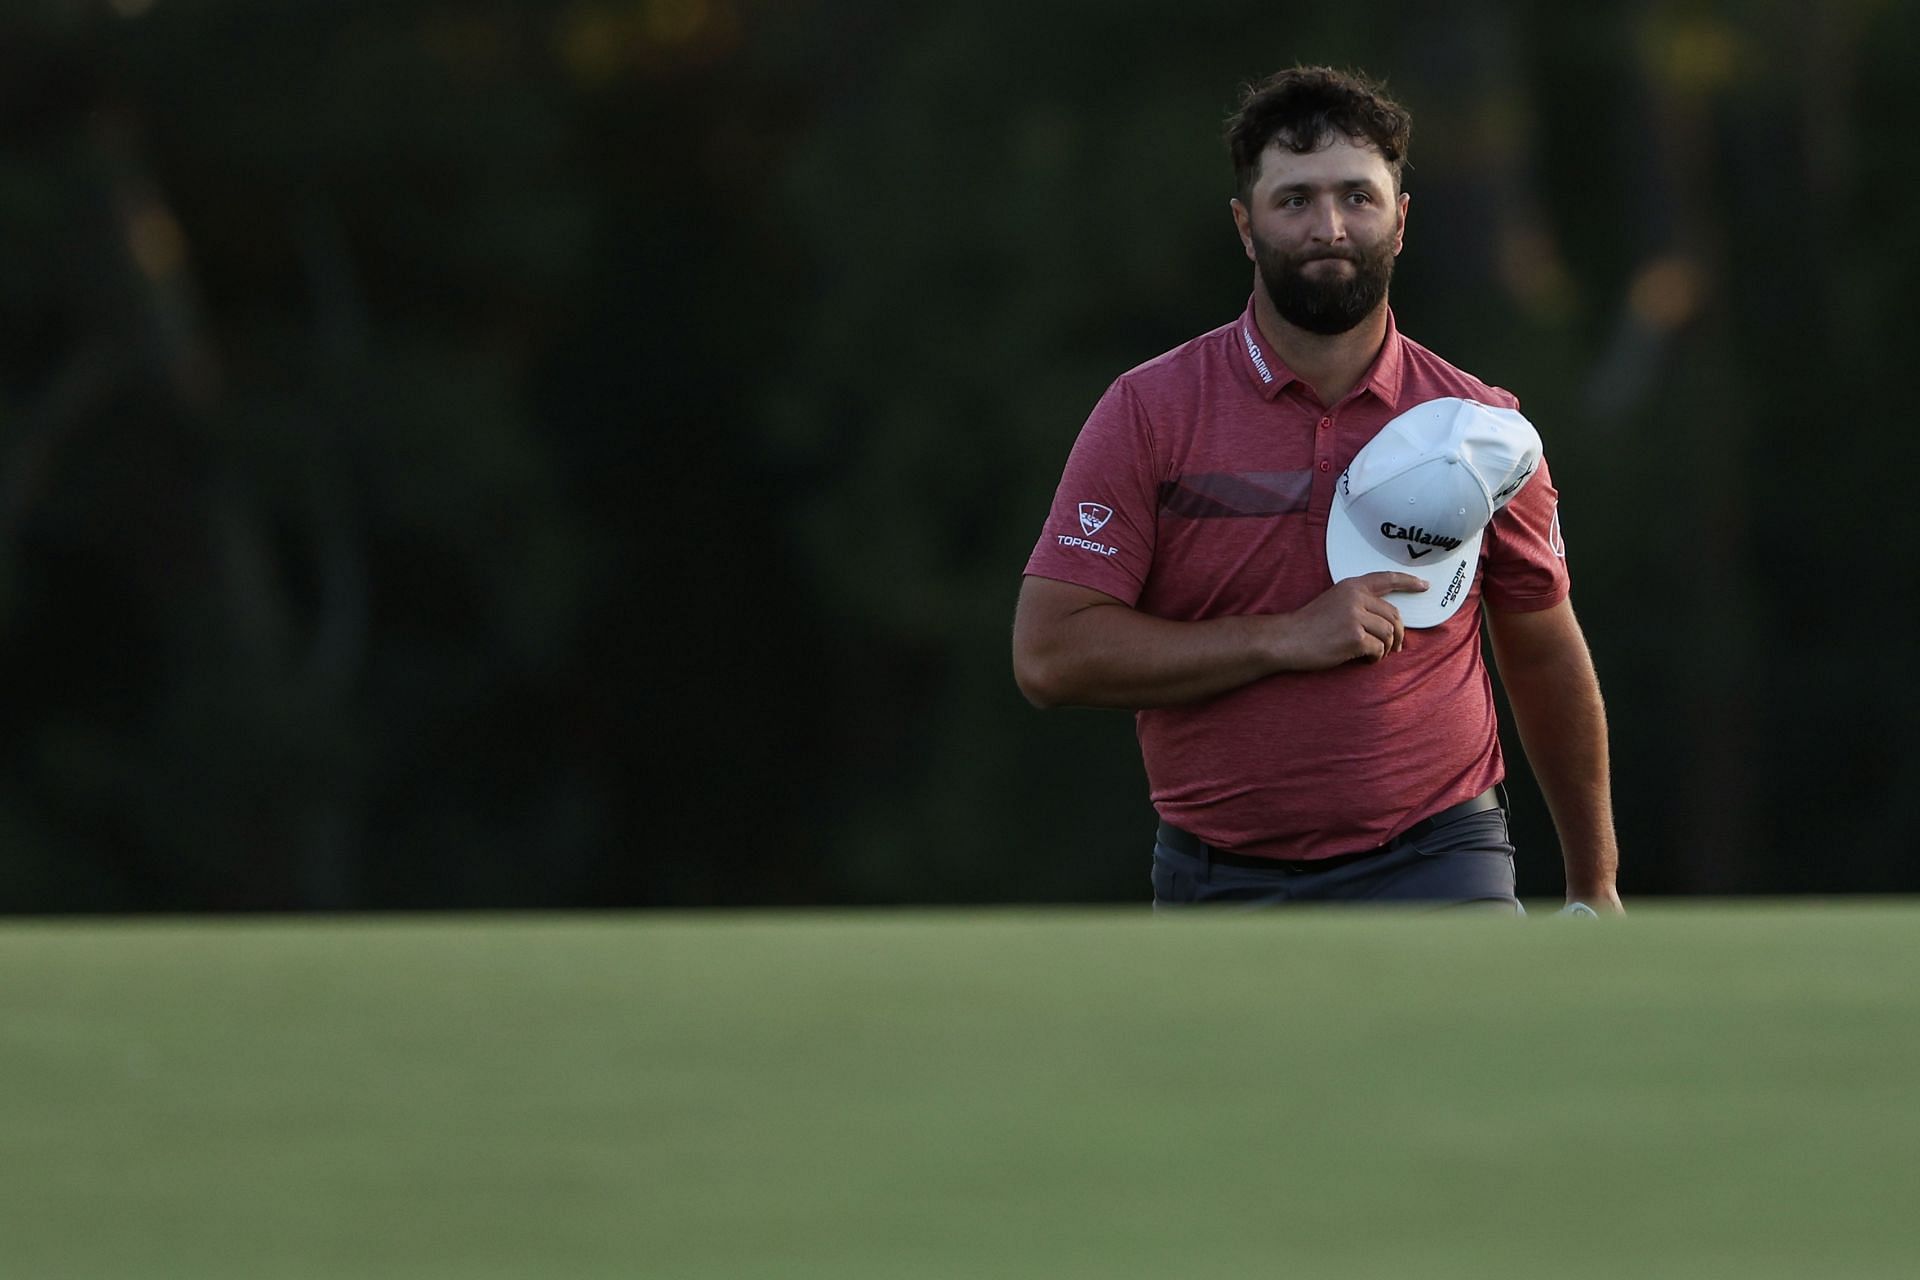 Can Jon Rahm repeat at the Mexico Open?